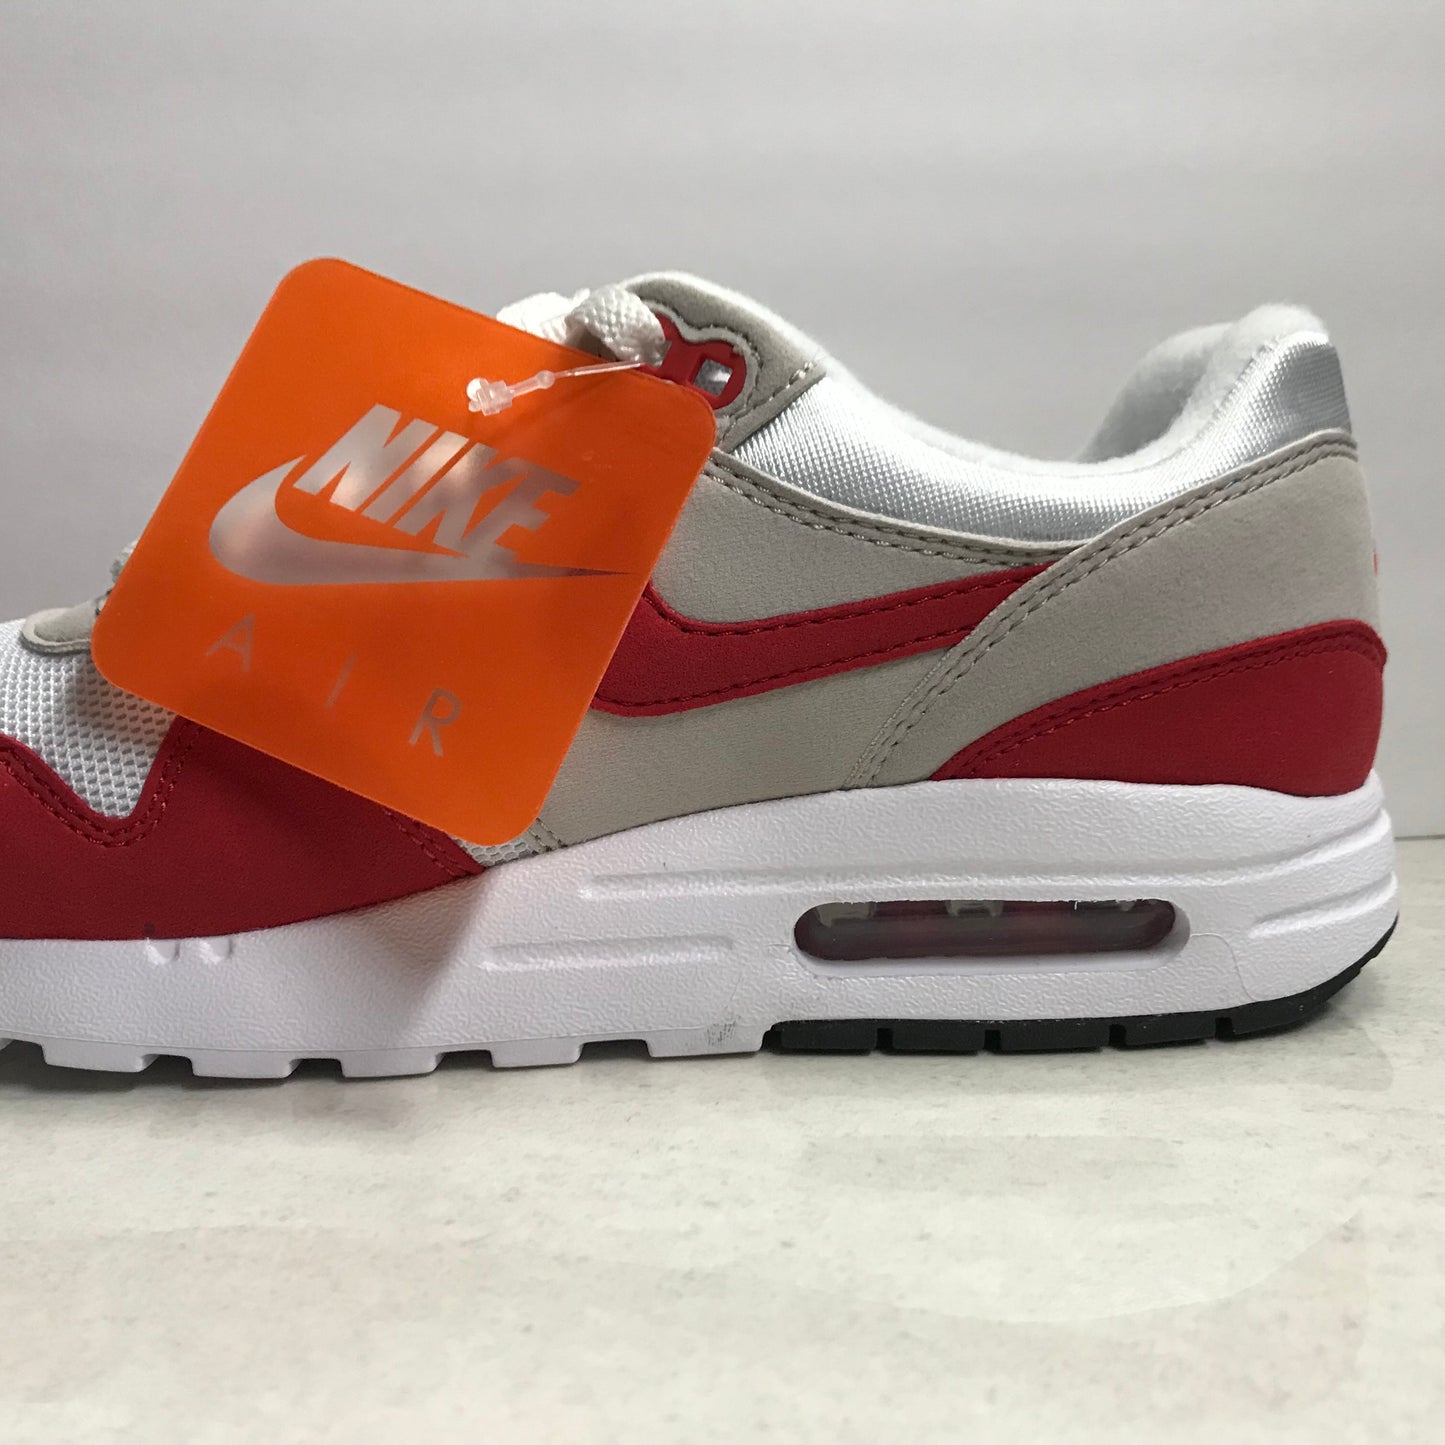 Air Max 1 QS GS 2017 Blanche/Rouge - 827657 101 - Taille Jeune 5Y